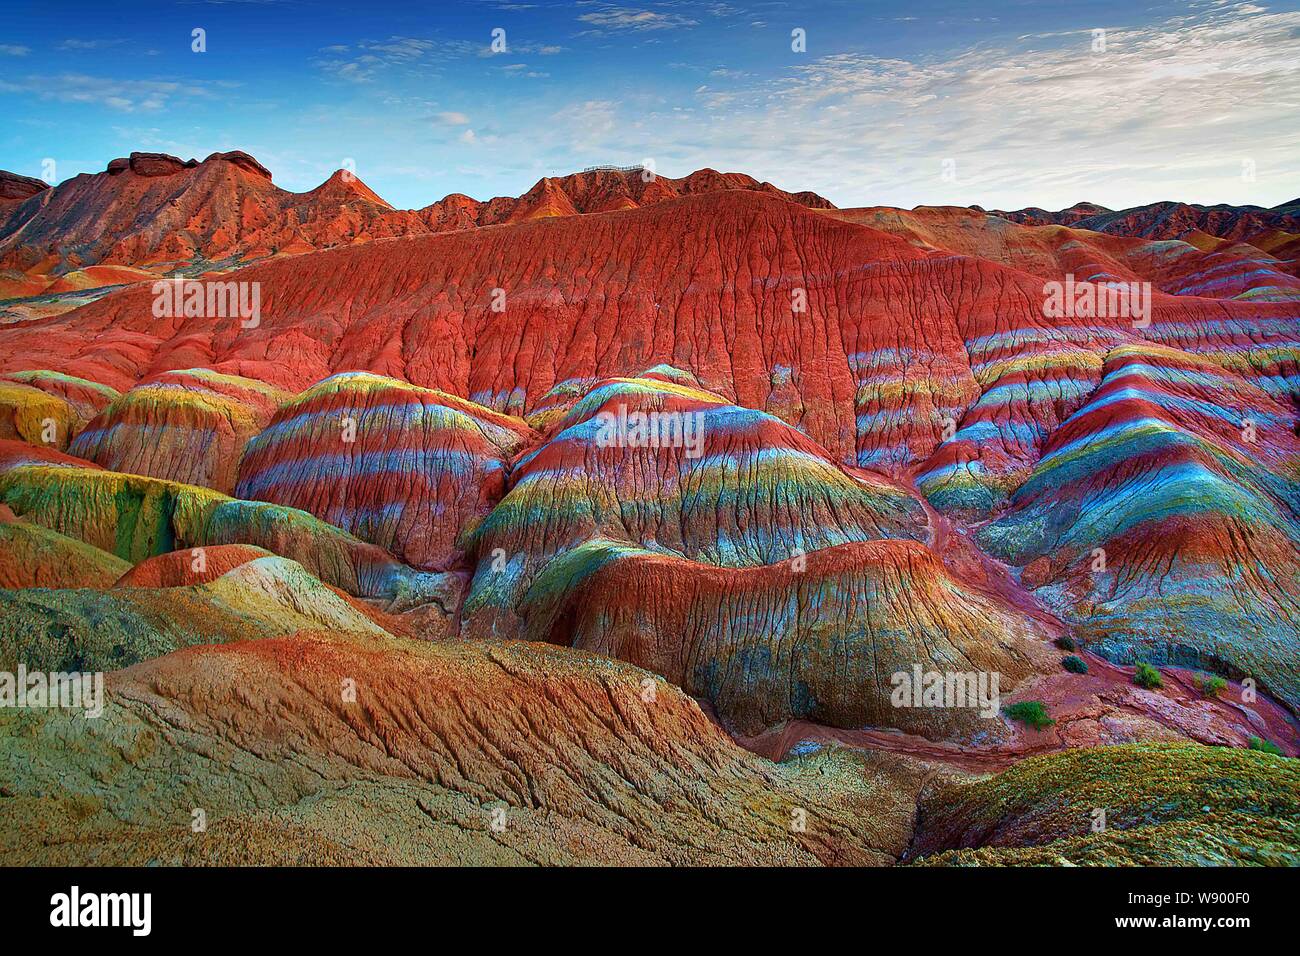 View of colourful rock formations at the Zhangye Danxia Landform Geological Park in Gansu Province, China, 22 September 2012. Stock Photo